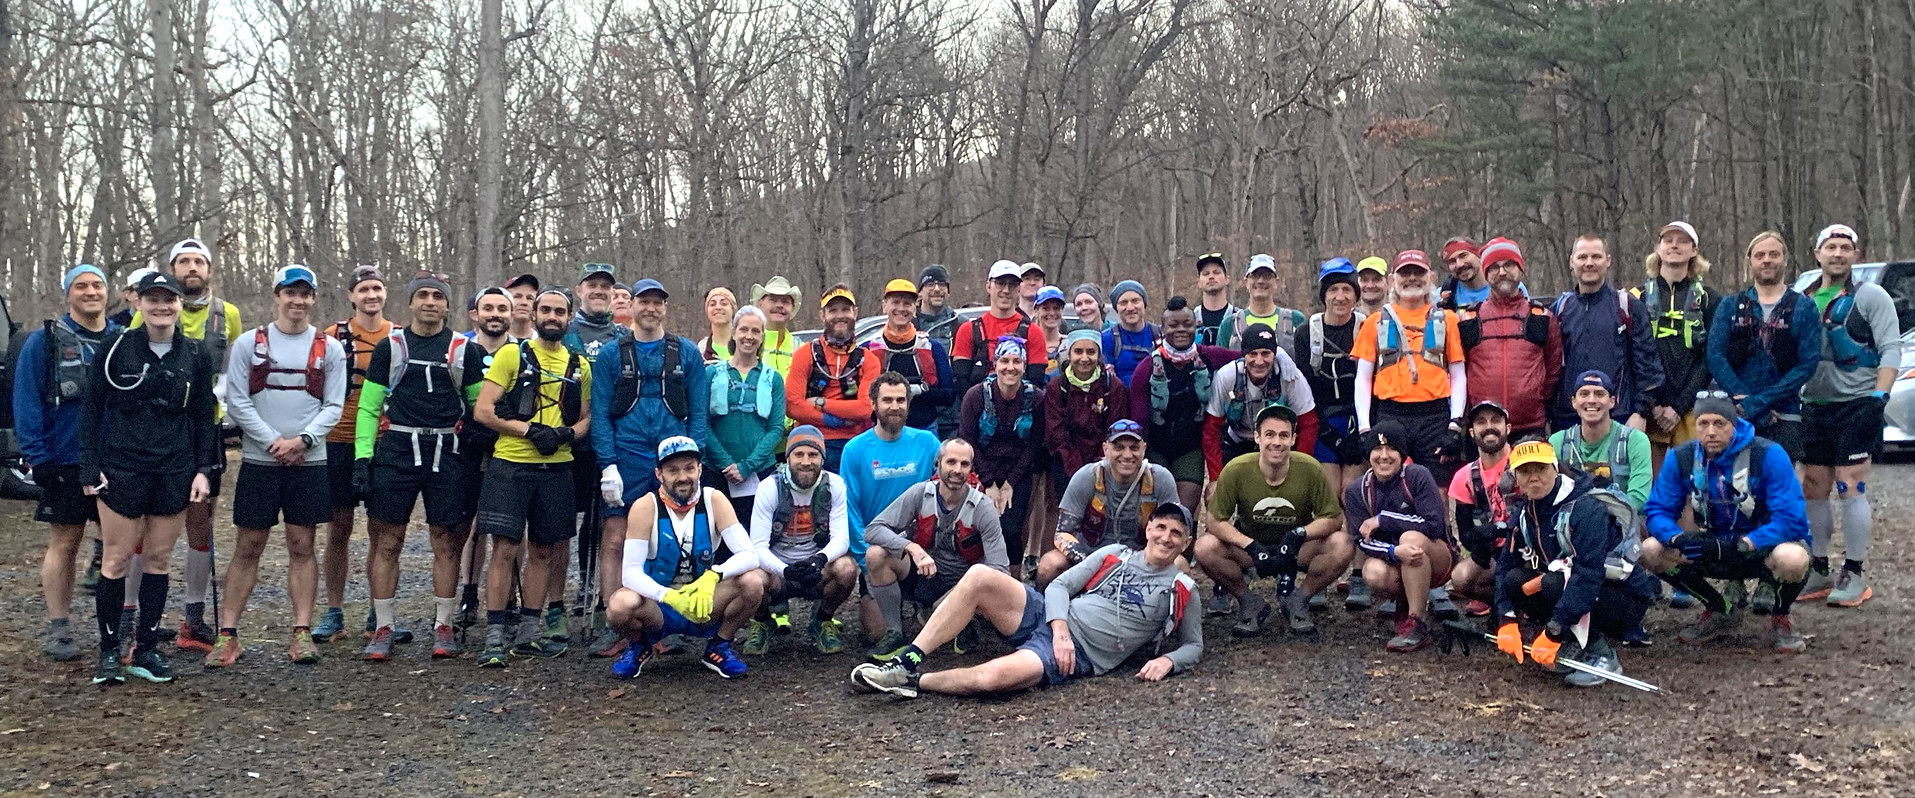 Group shot before the 2019 Boyers Furnace